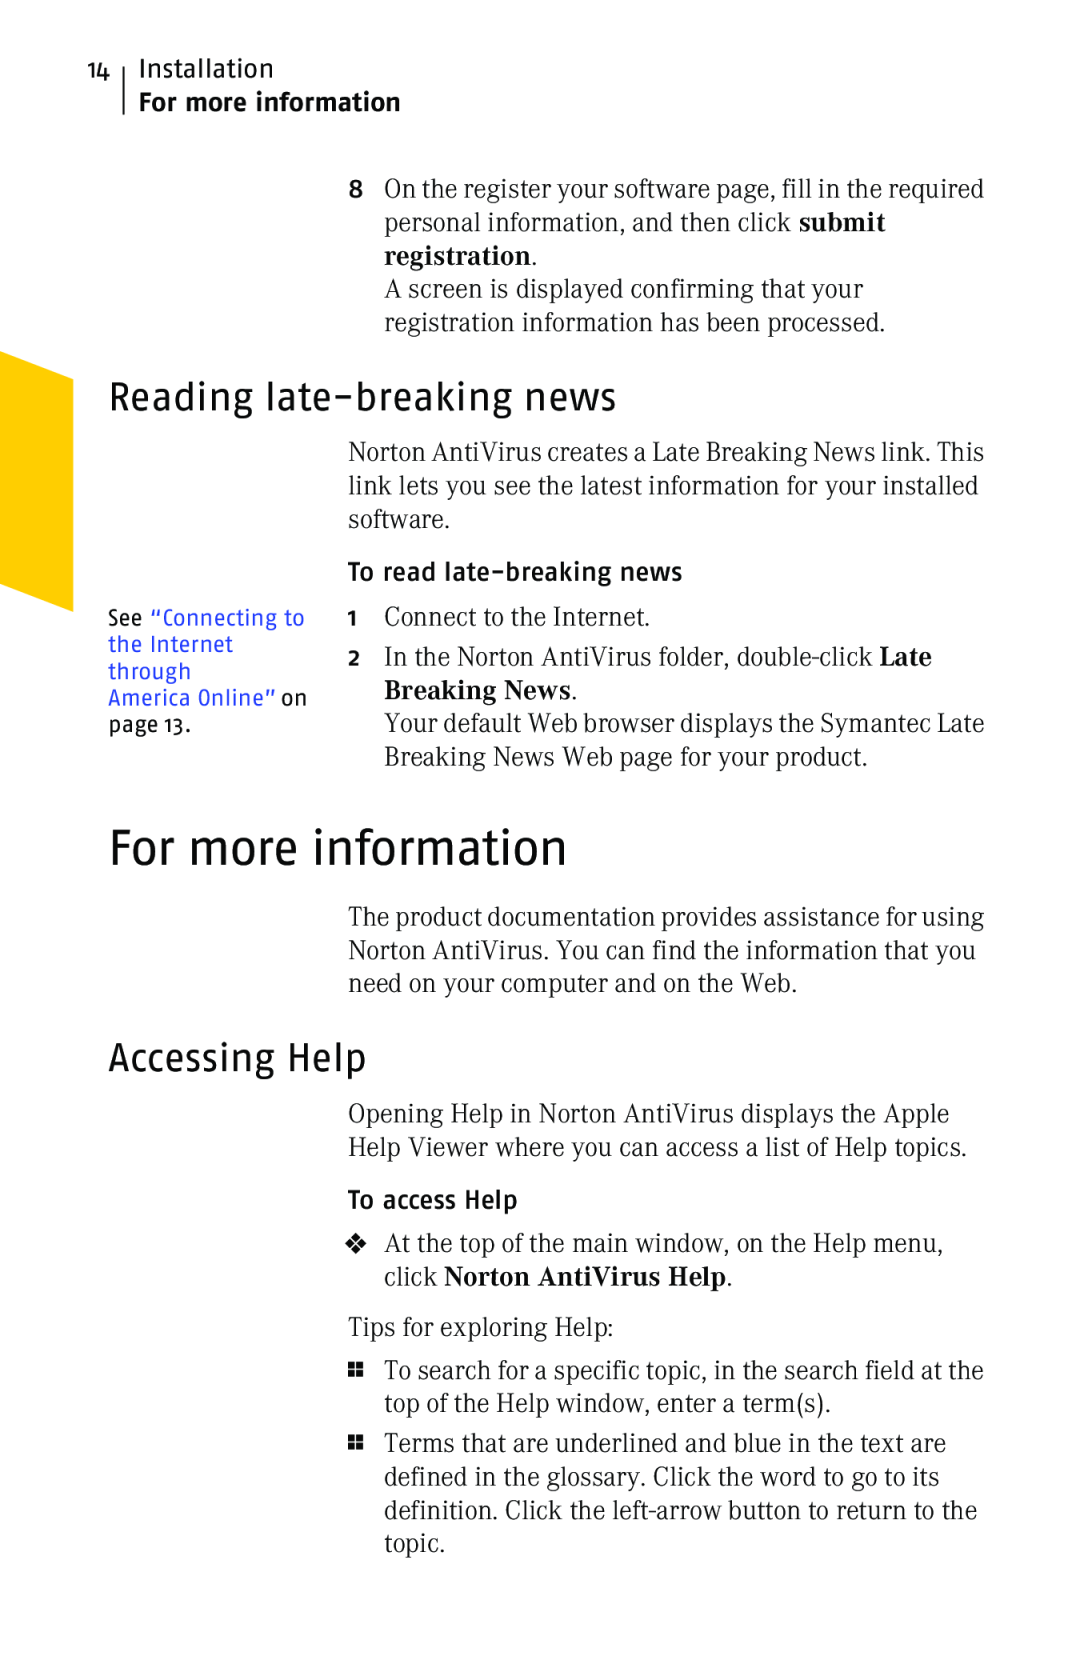 Symantec 10 manual For more information, Reading late-breakingnews, Accessing Help 